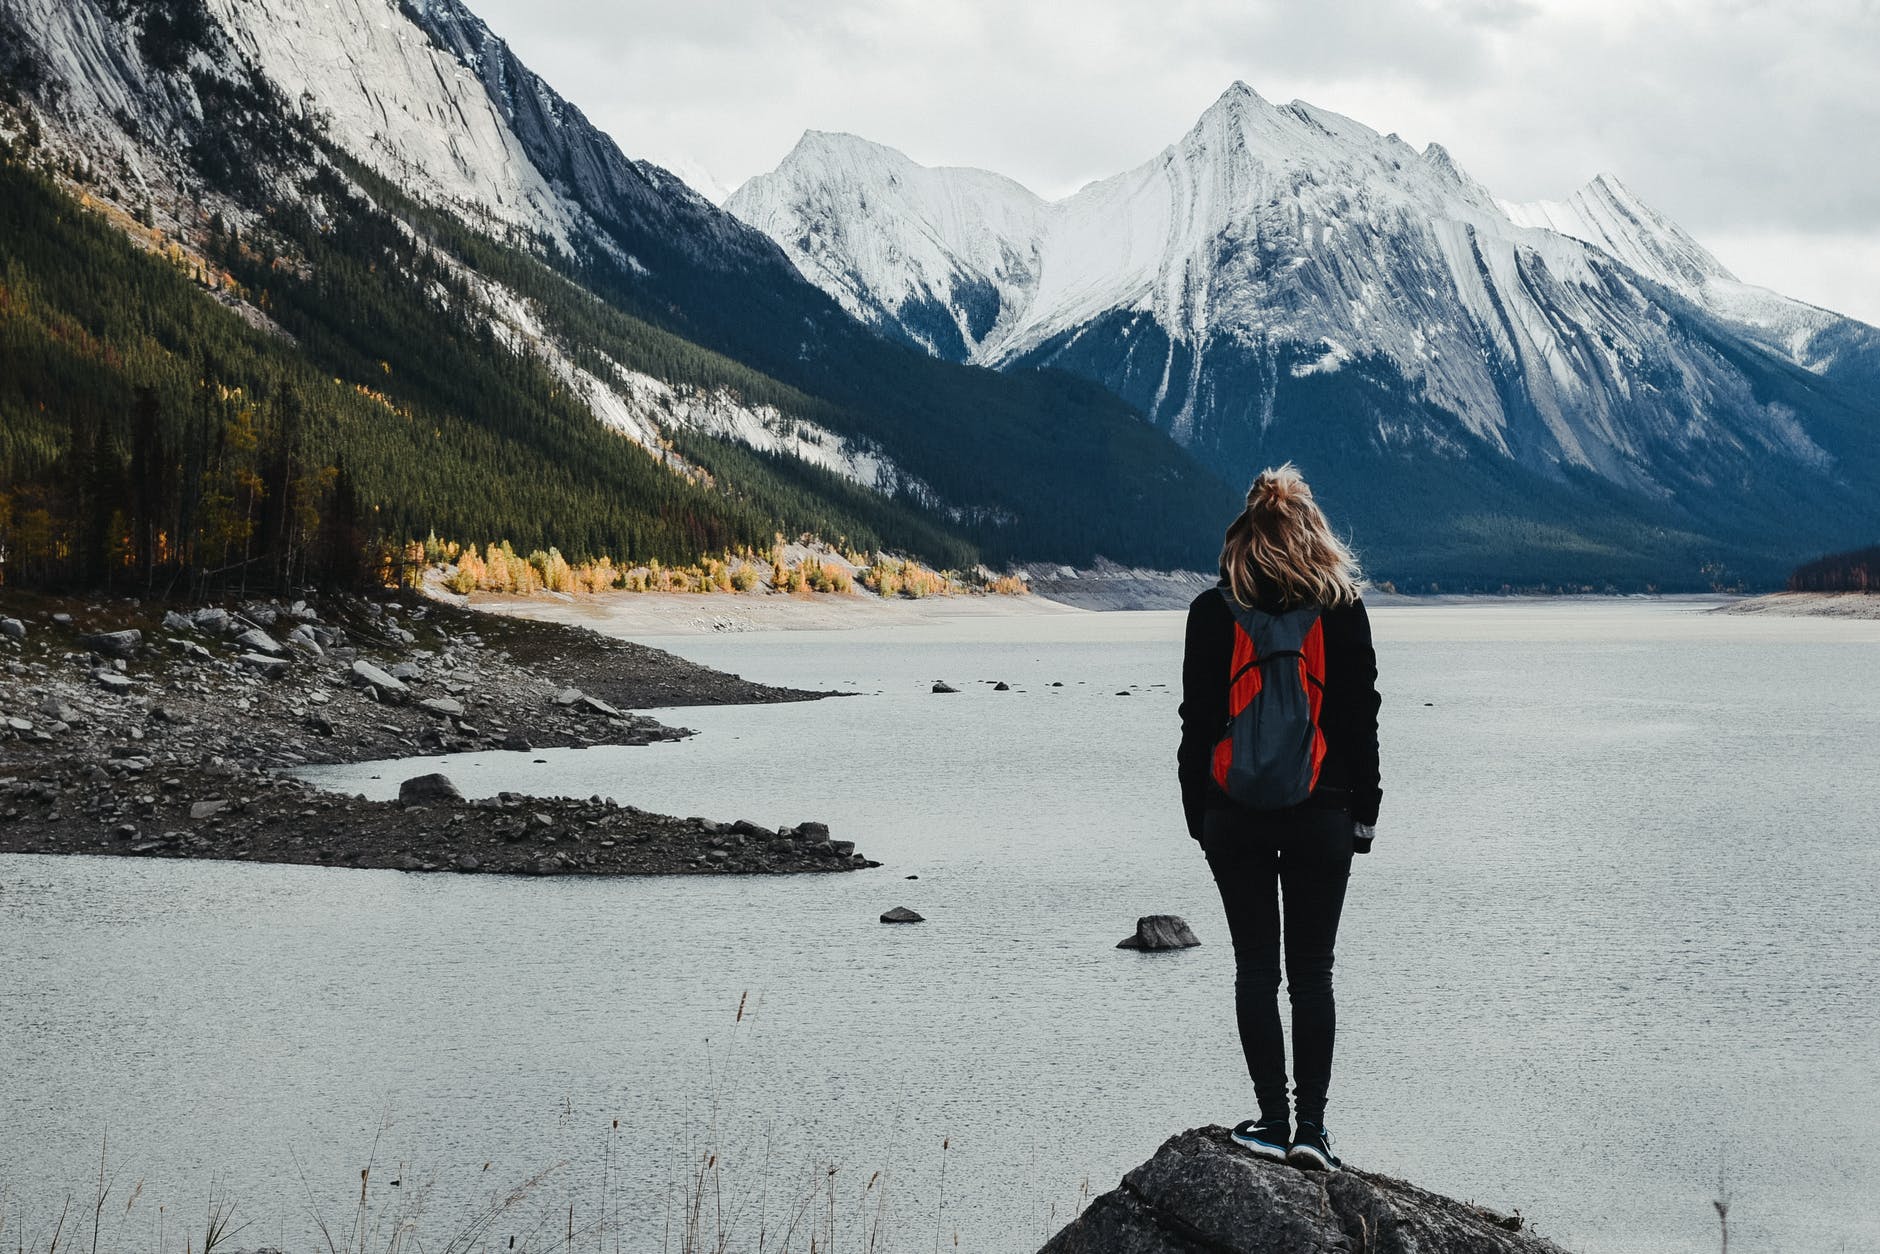 traveler admiring lake surrounded by snowy mountains